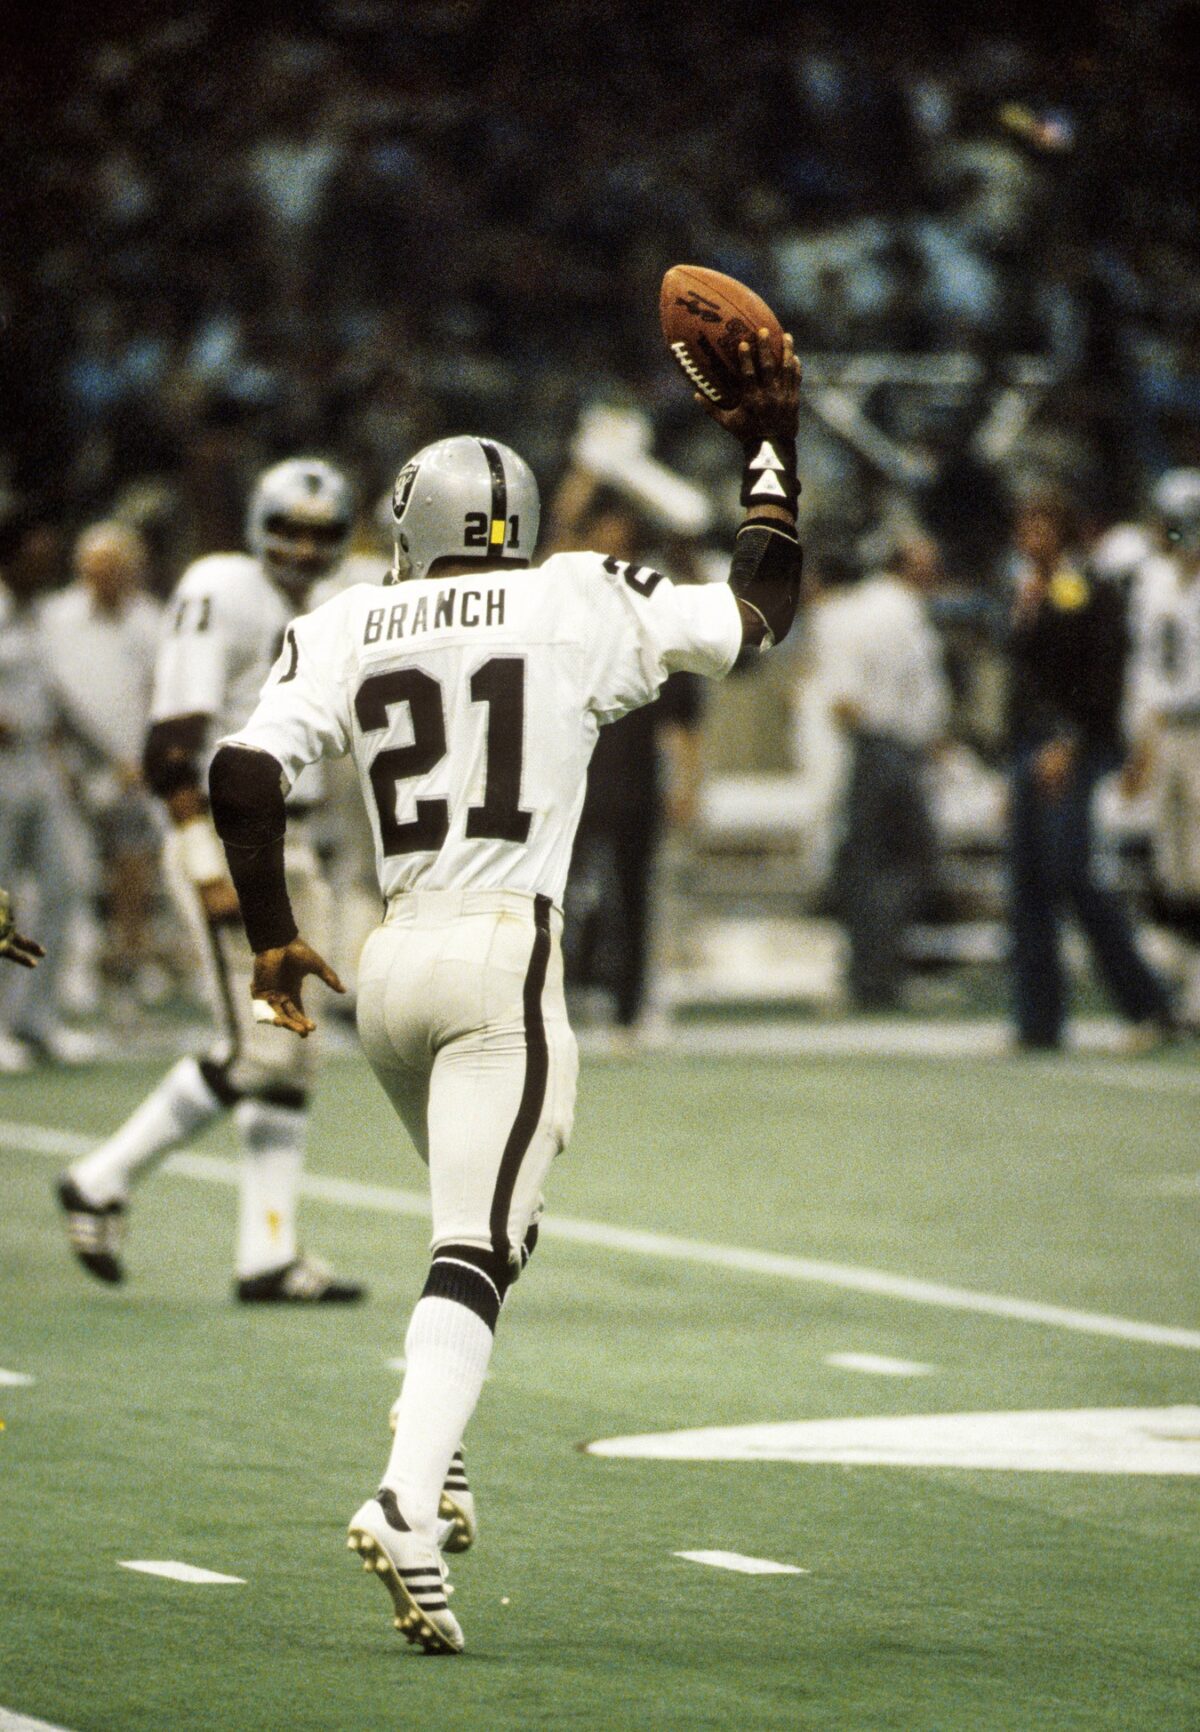 Raiders legendary WR Cliff Branch to finally be enshrined in Pro Football Hall of Fame